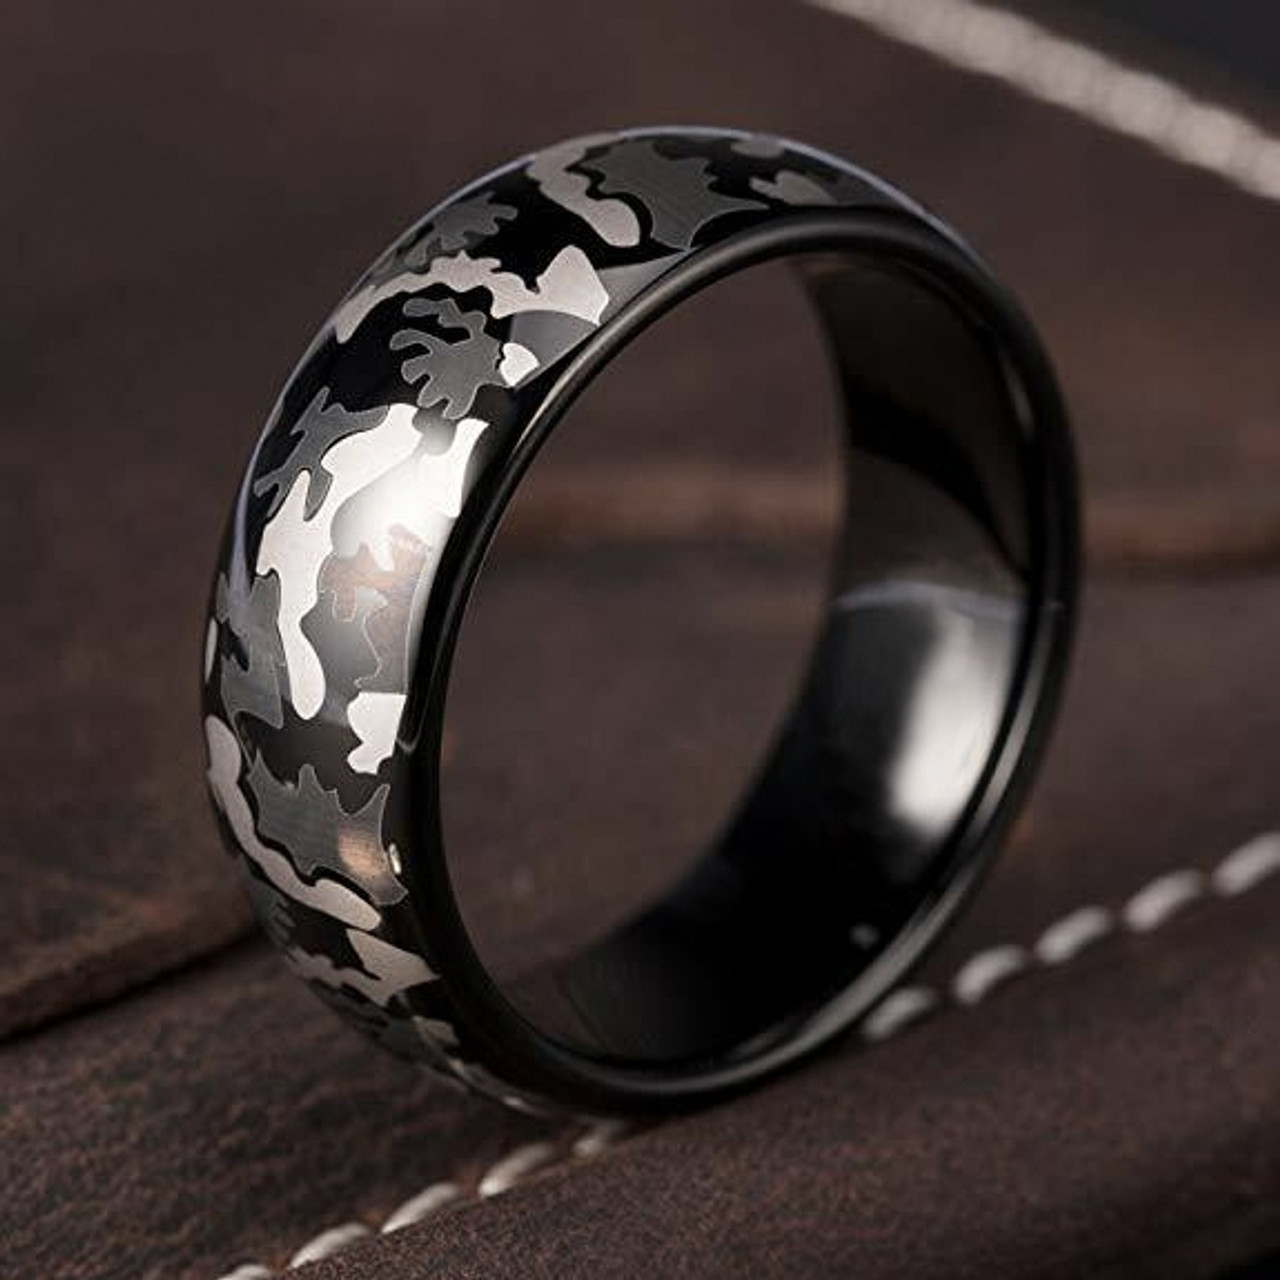 (8mm) Unisex or Men's Steel Wedding ring band. Silver and Black Camouflage Wedding Ring